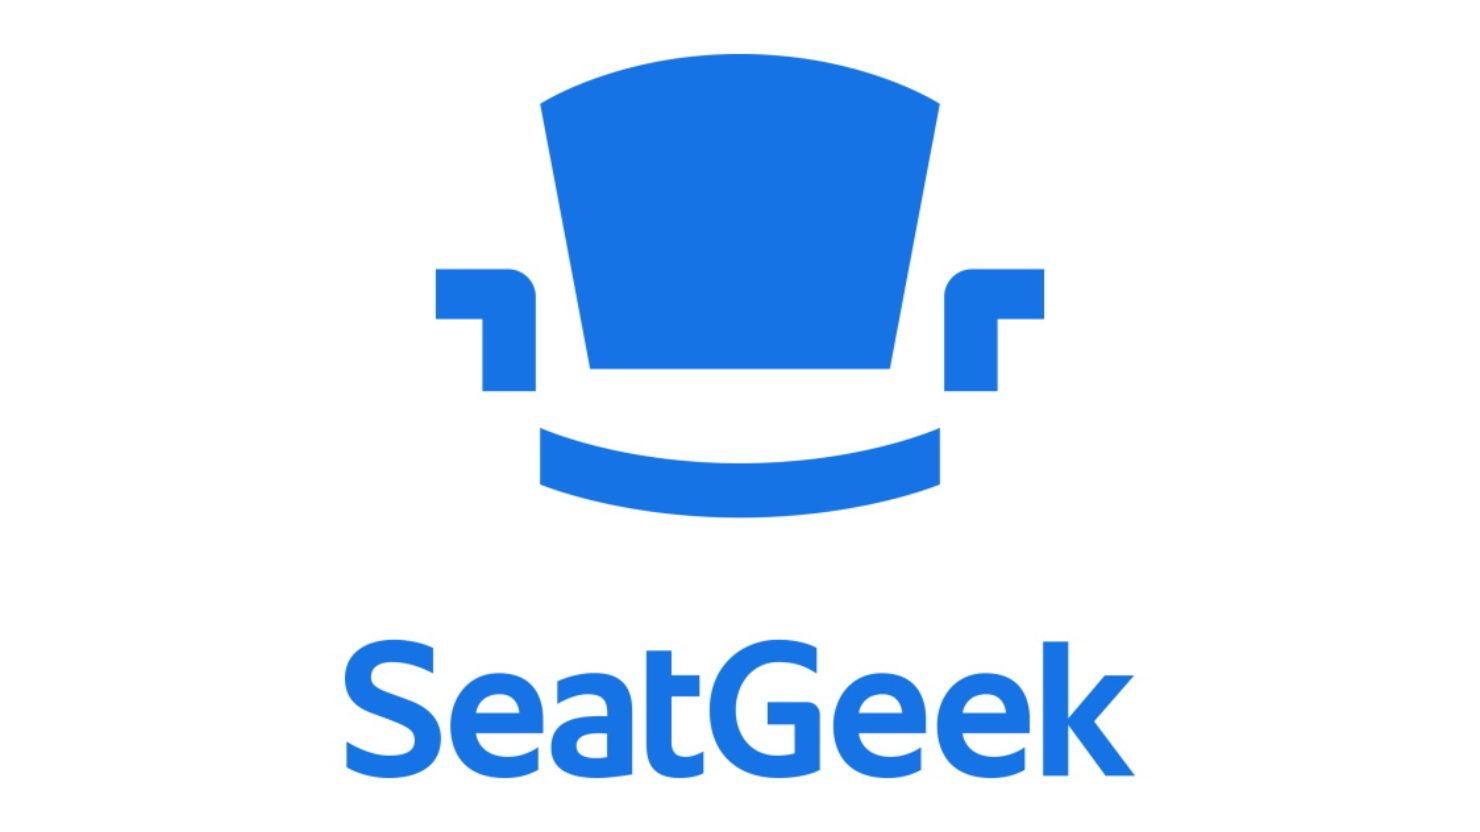 SeatGeek terminates deal to go public with Billy Beane's SPAC due